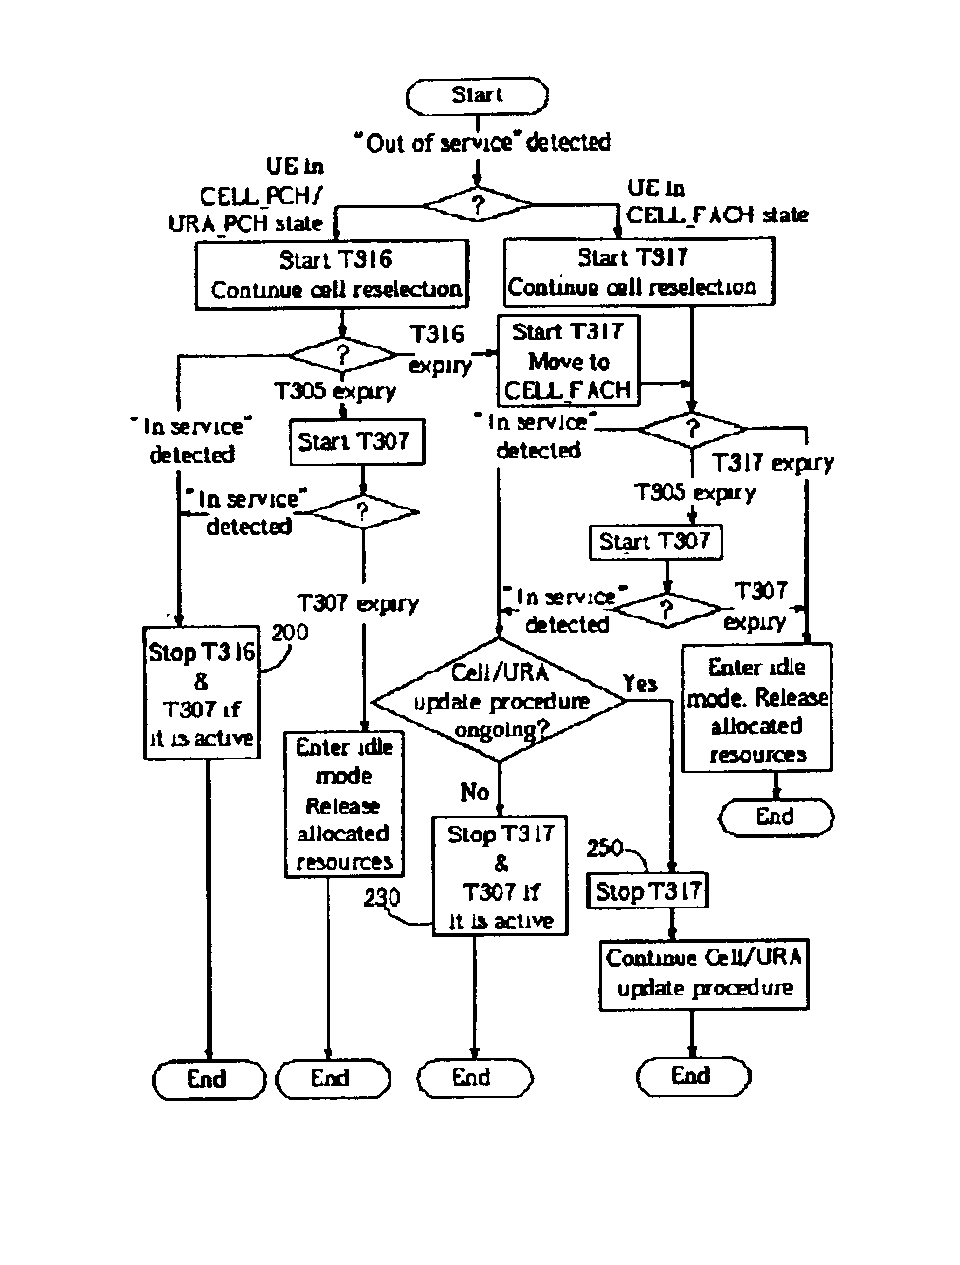 Handling of a wireless device re-entering a service area